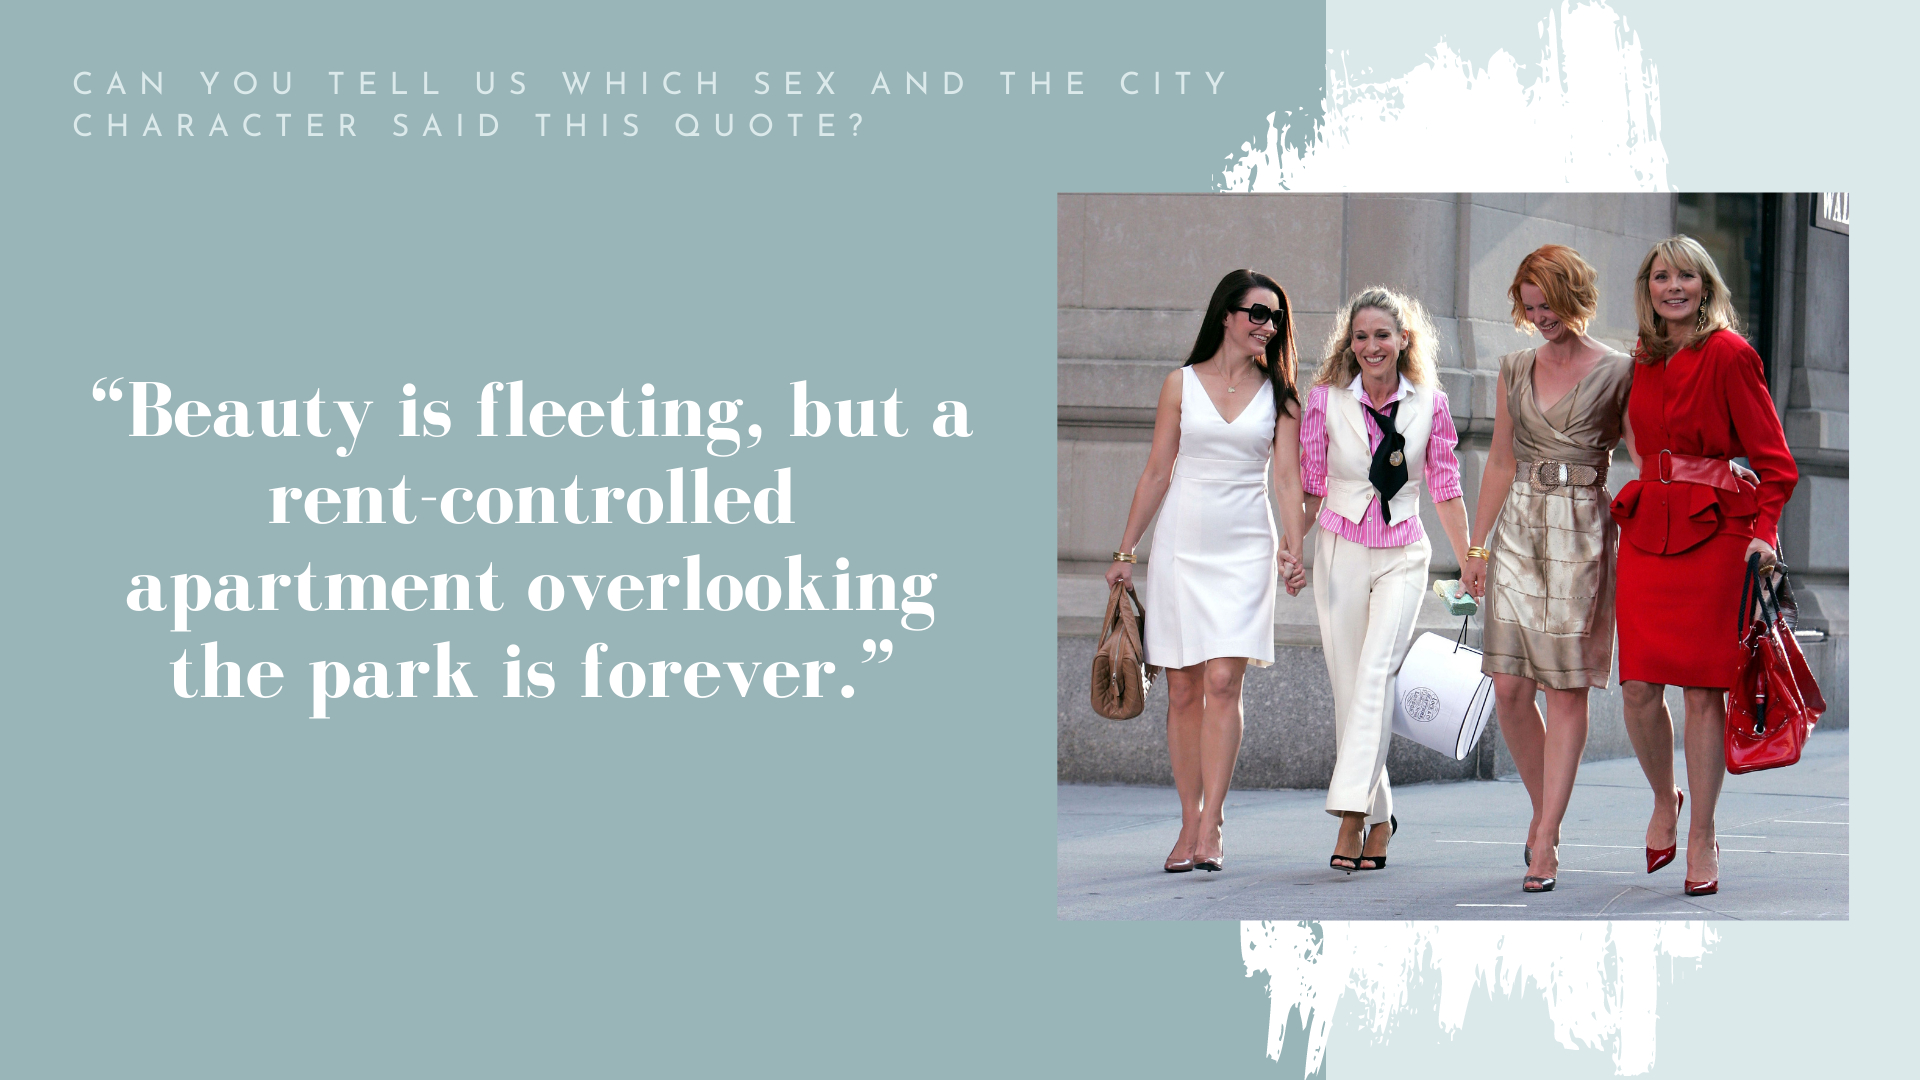 sex and the city quotes